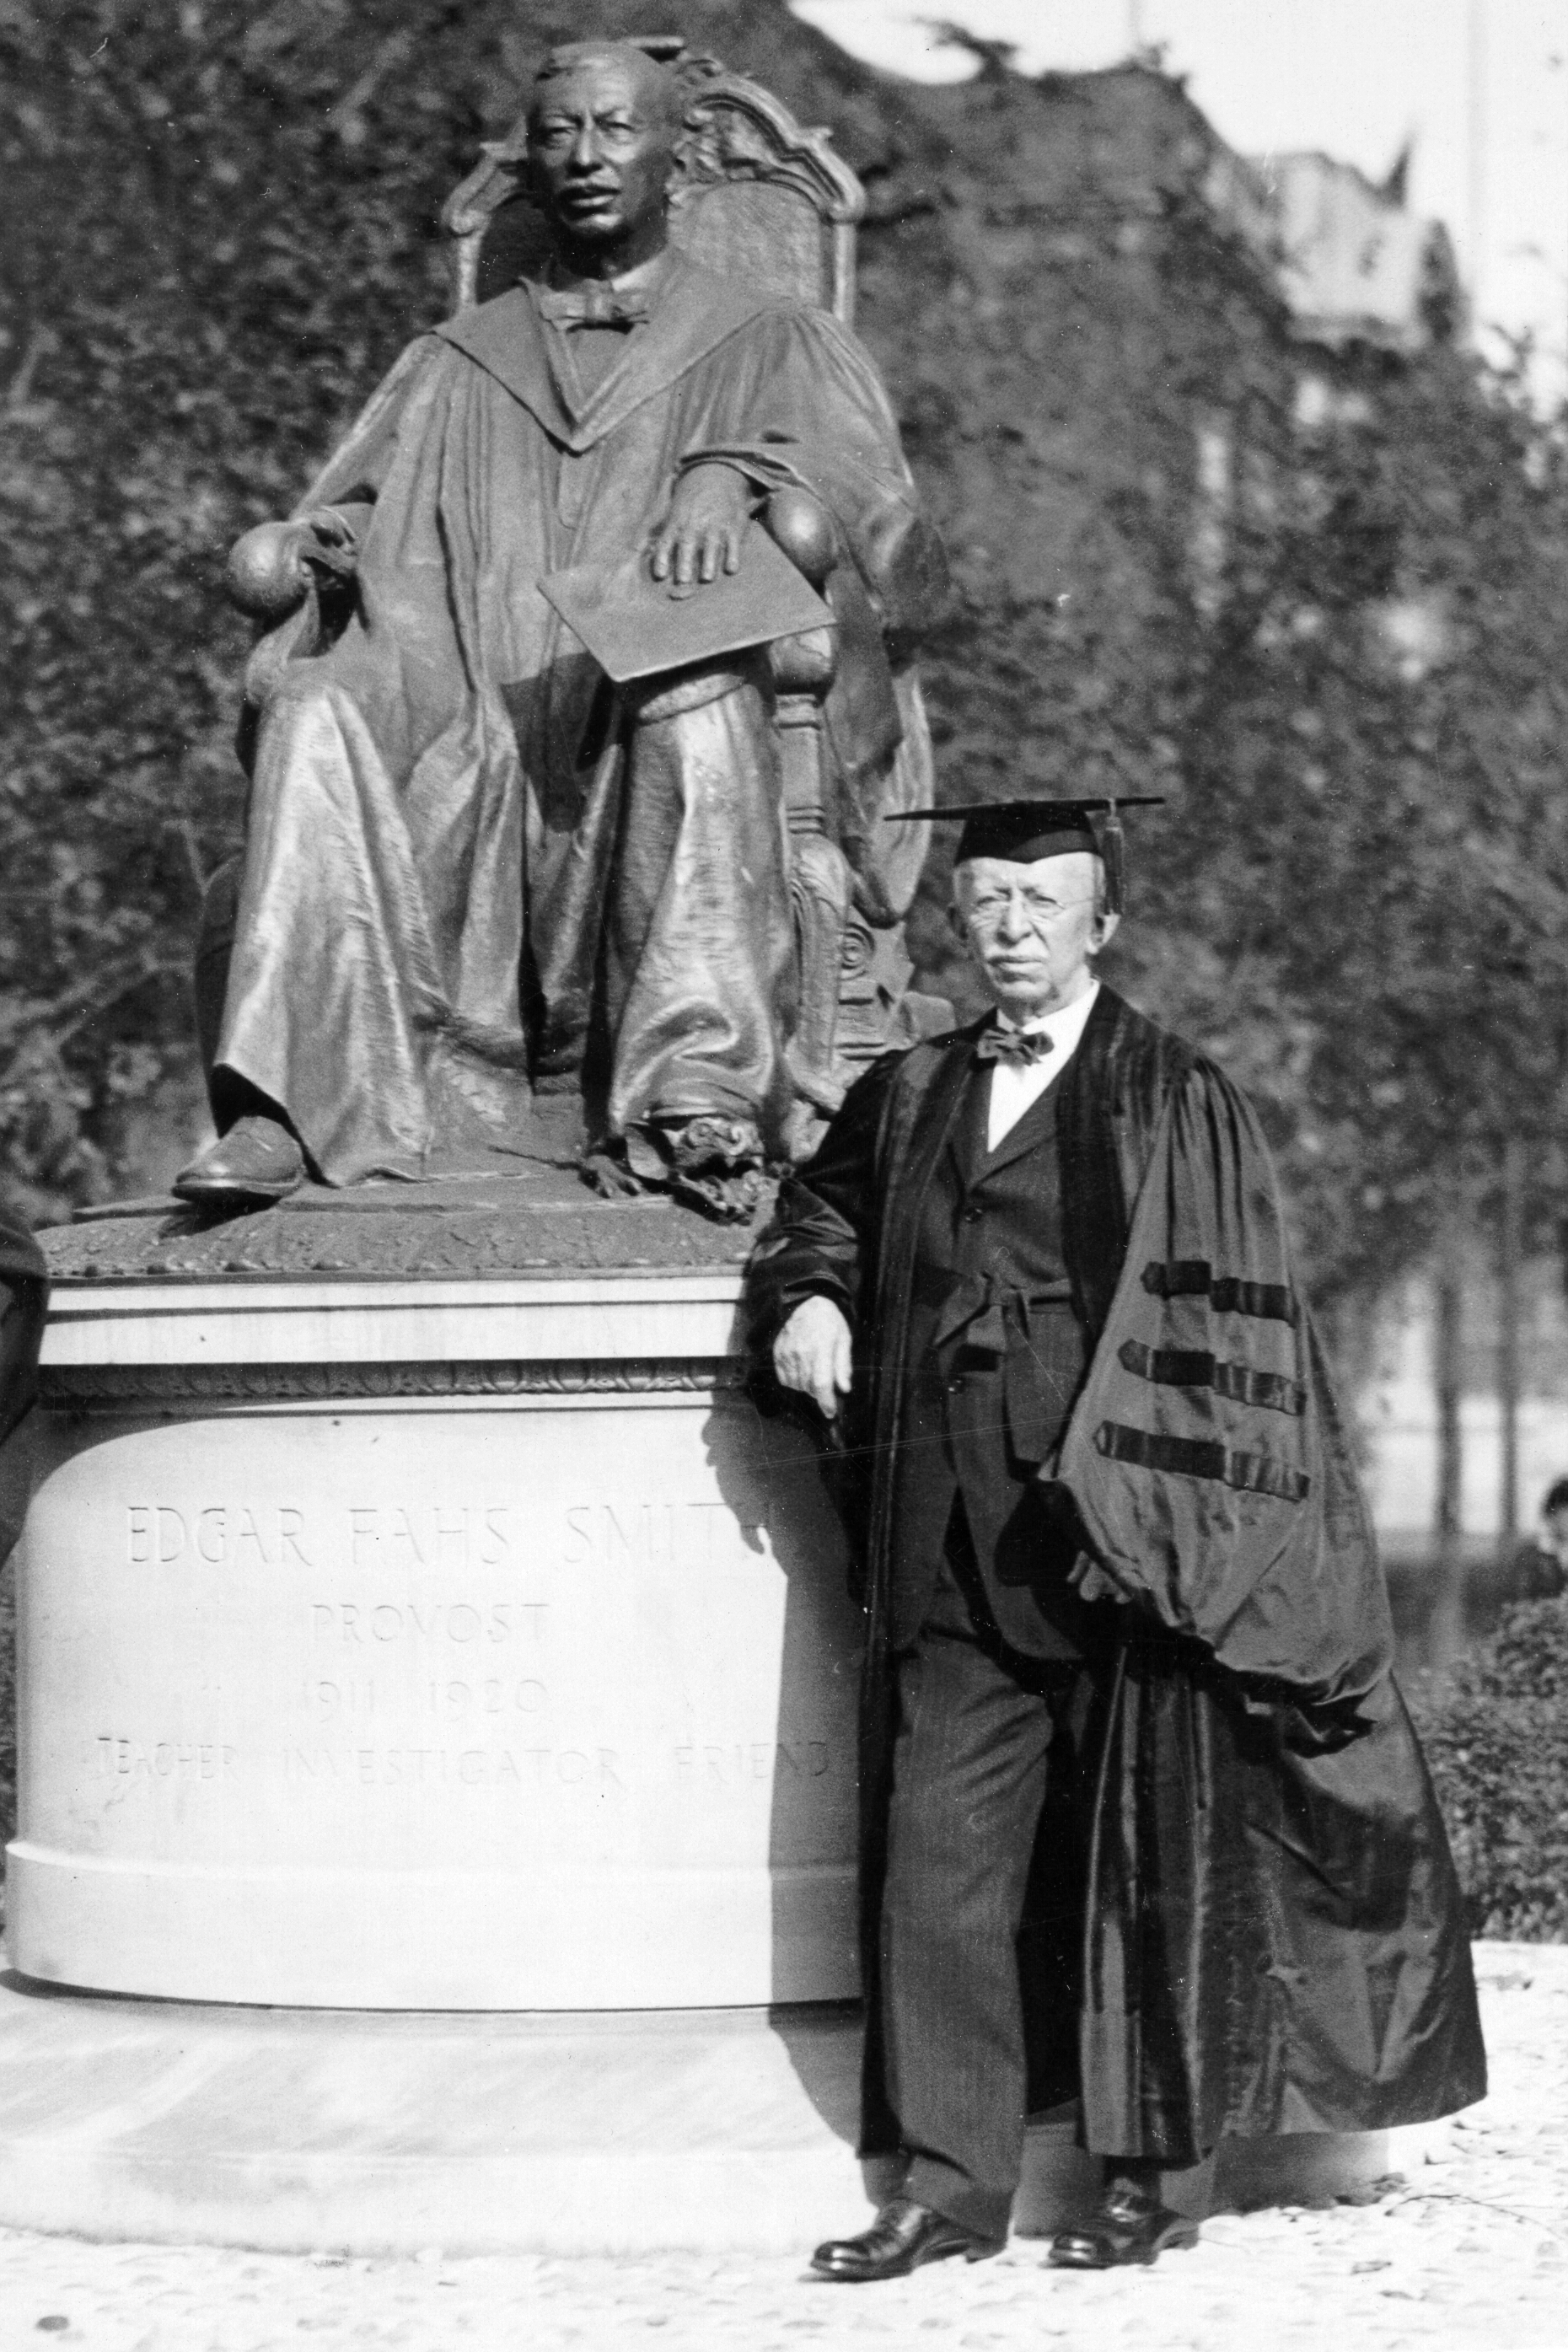 edgar fahs smith posing in front of a statue of himself, he is wearing a cap and gown and stands at the level of the statue's feet